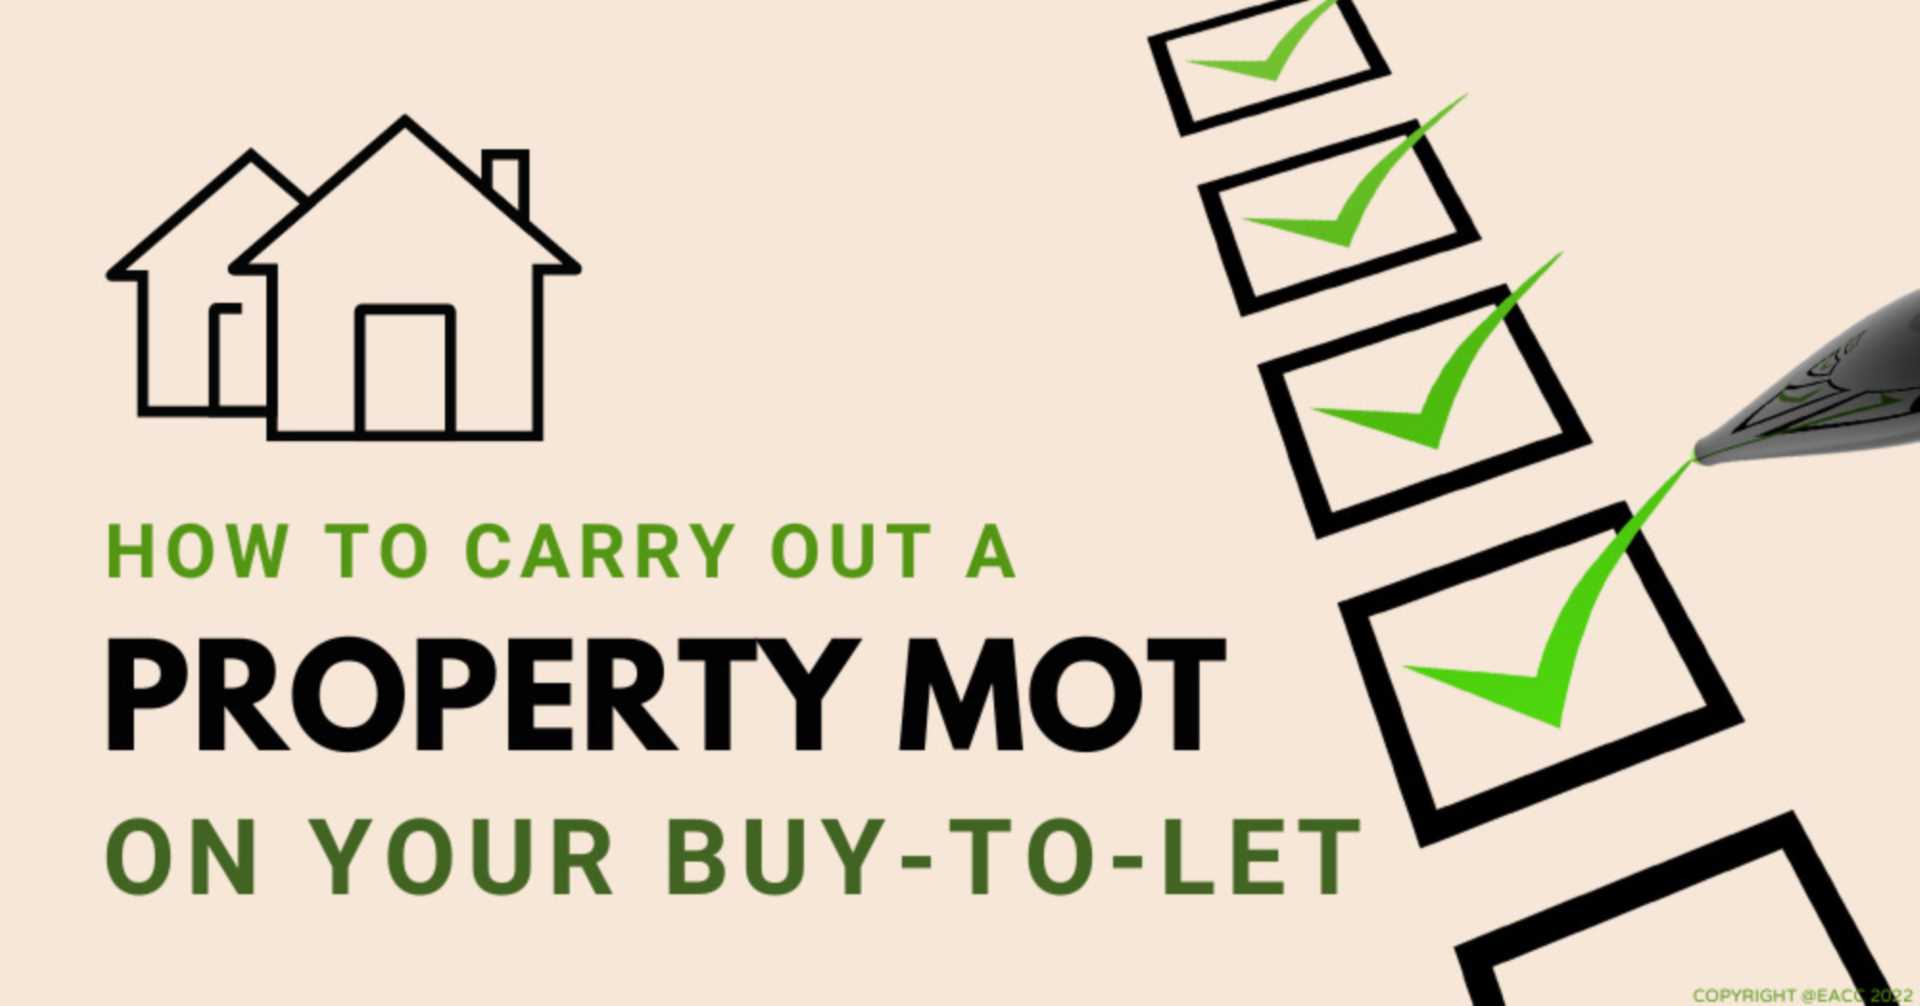 How to Carry Out a Property MOT on Your Newham Buy-to-Let